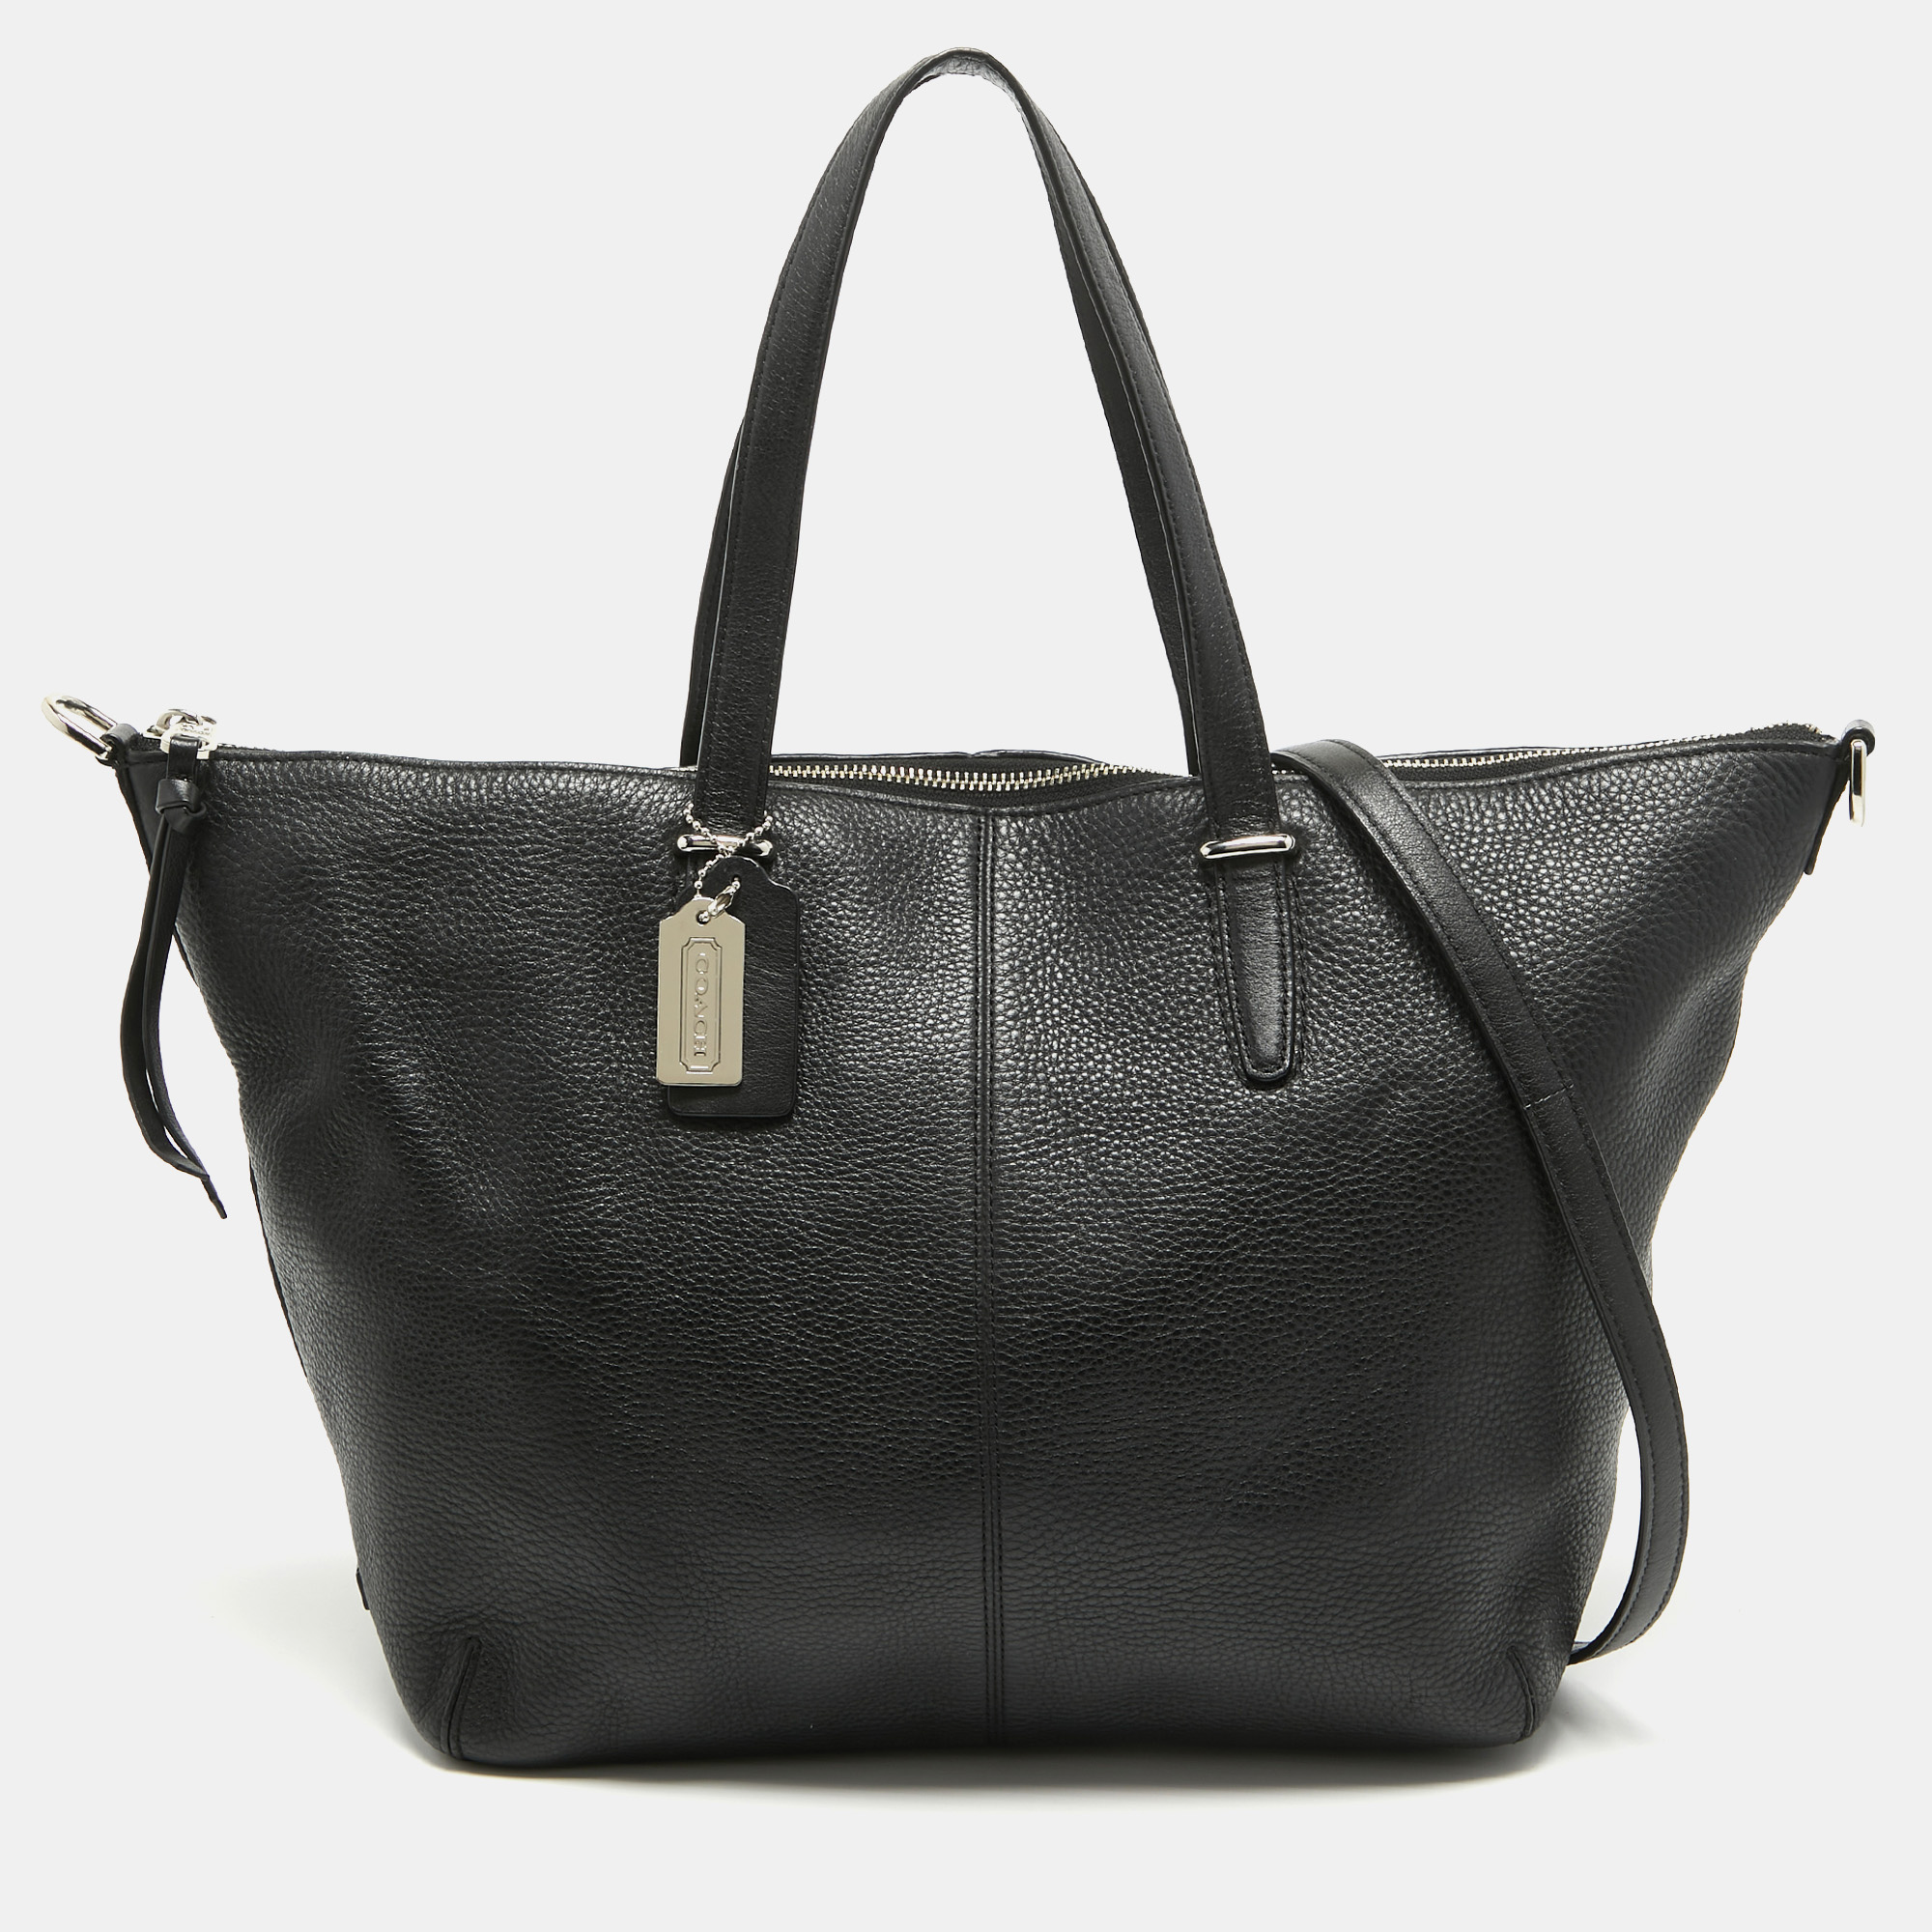 Pre-owned Coach Black Leather Bleecker Zip Tote